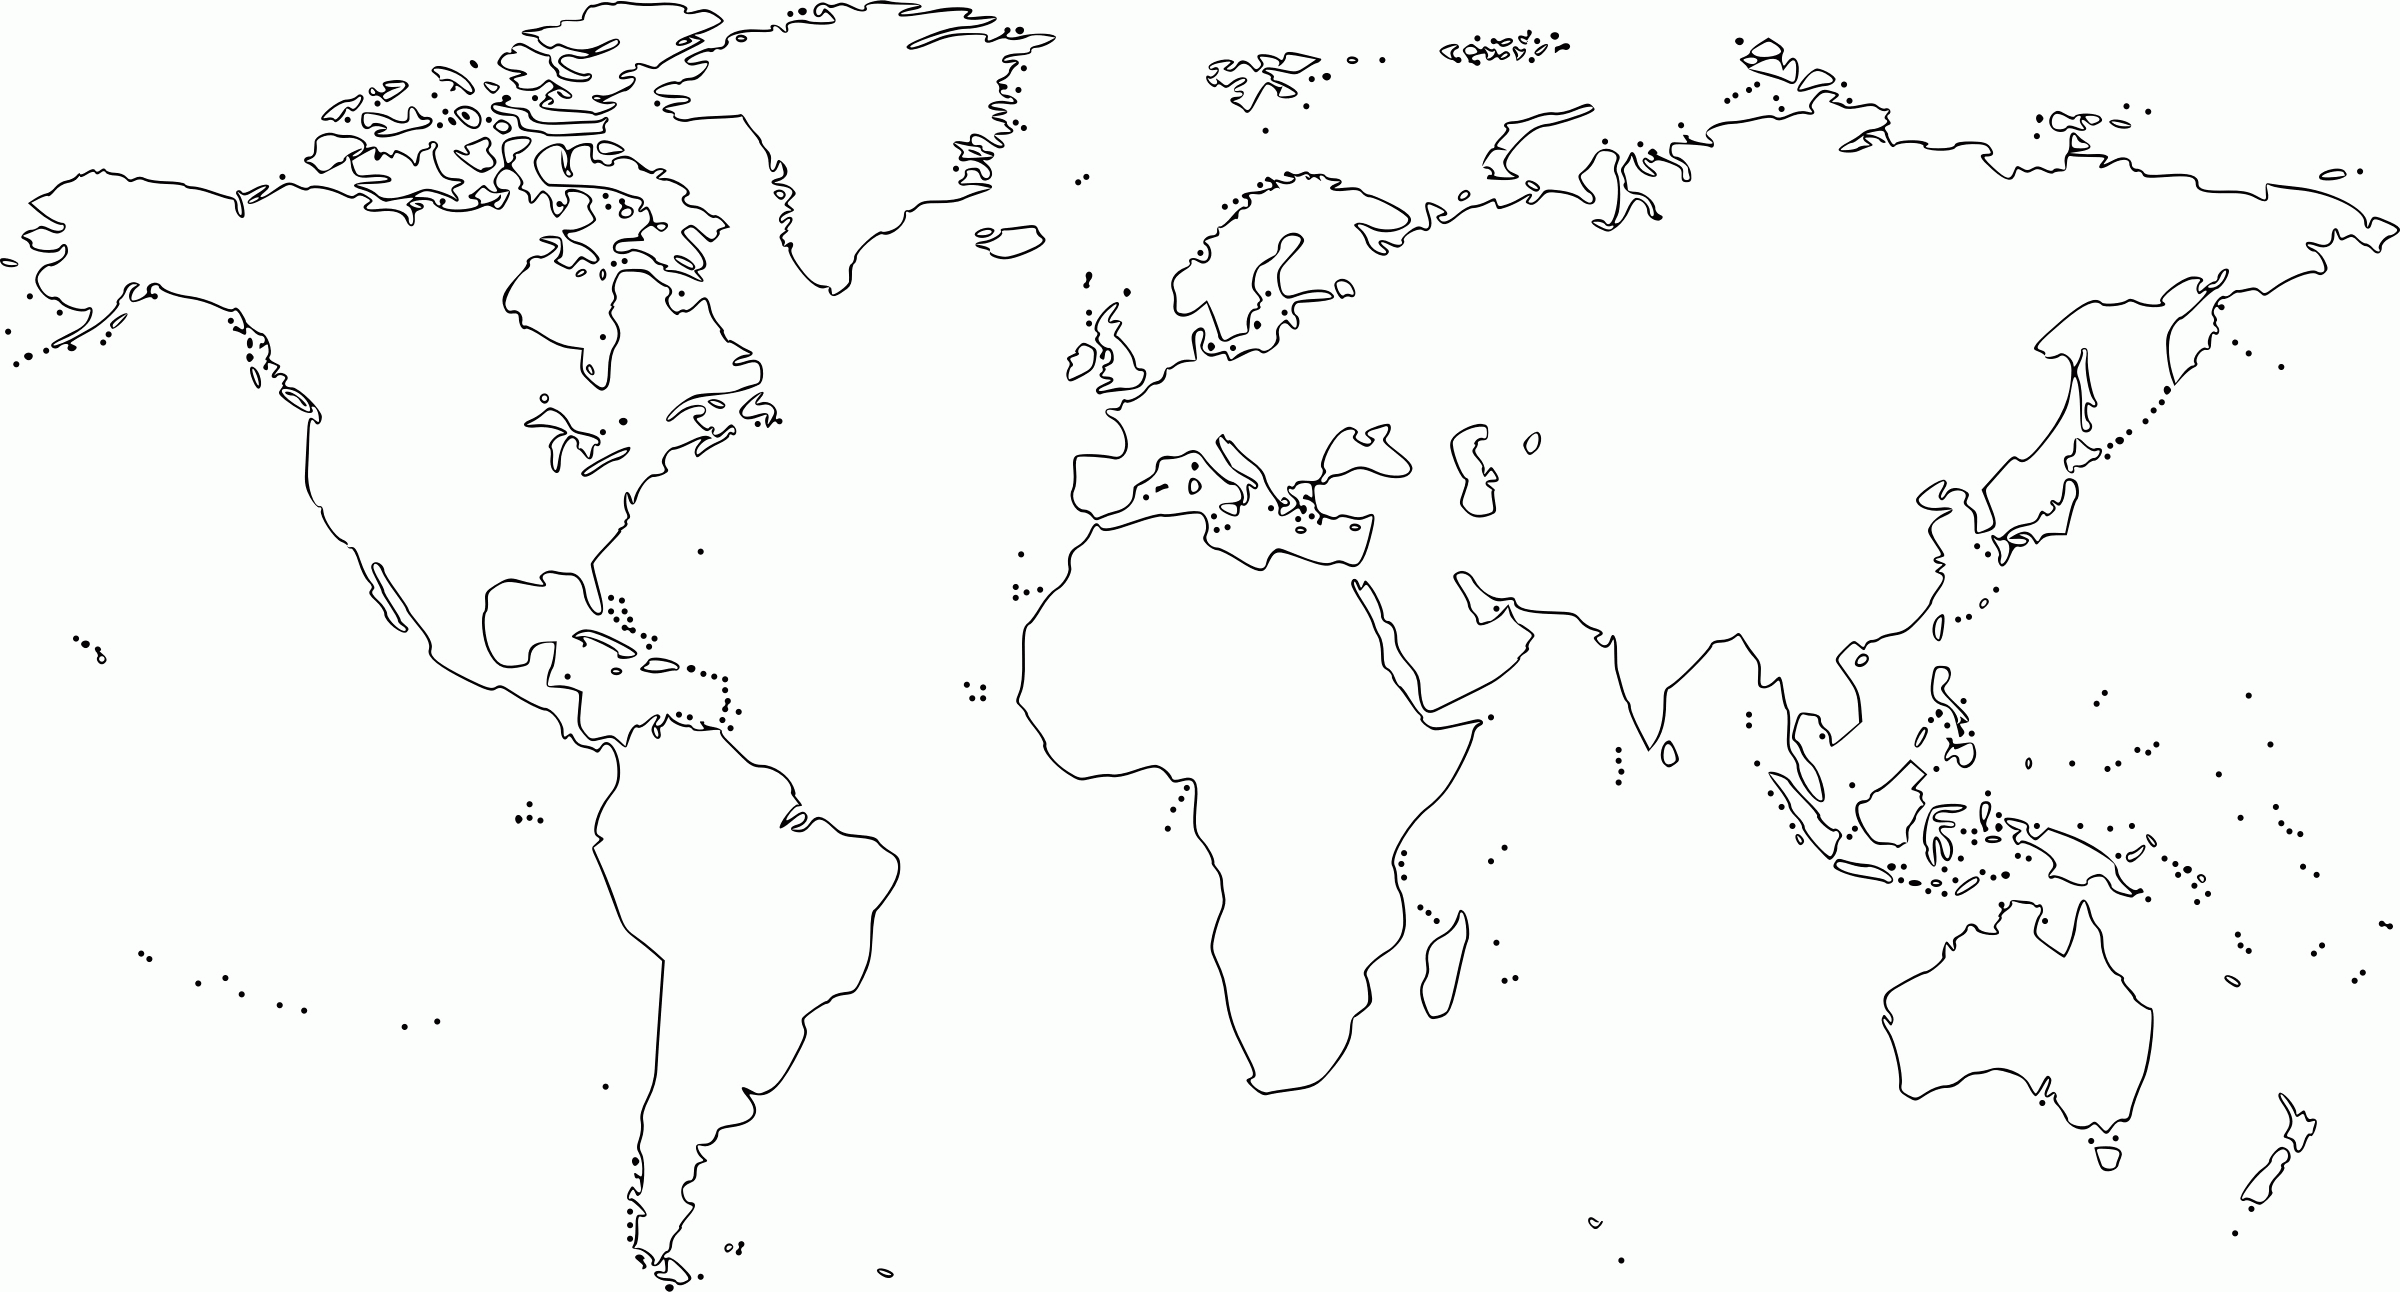 World Map Coloring Page With Countries Labeled Texas State Map ...